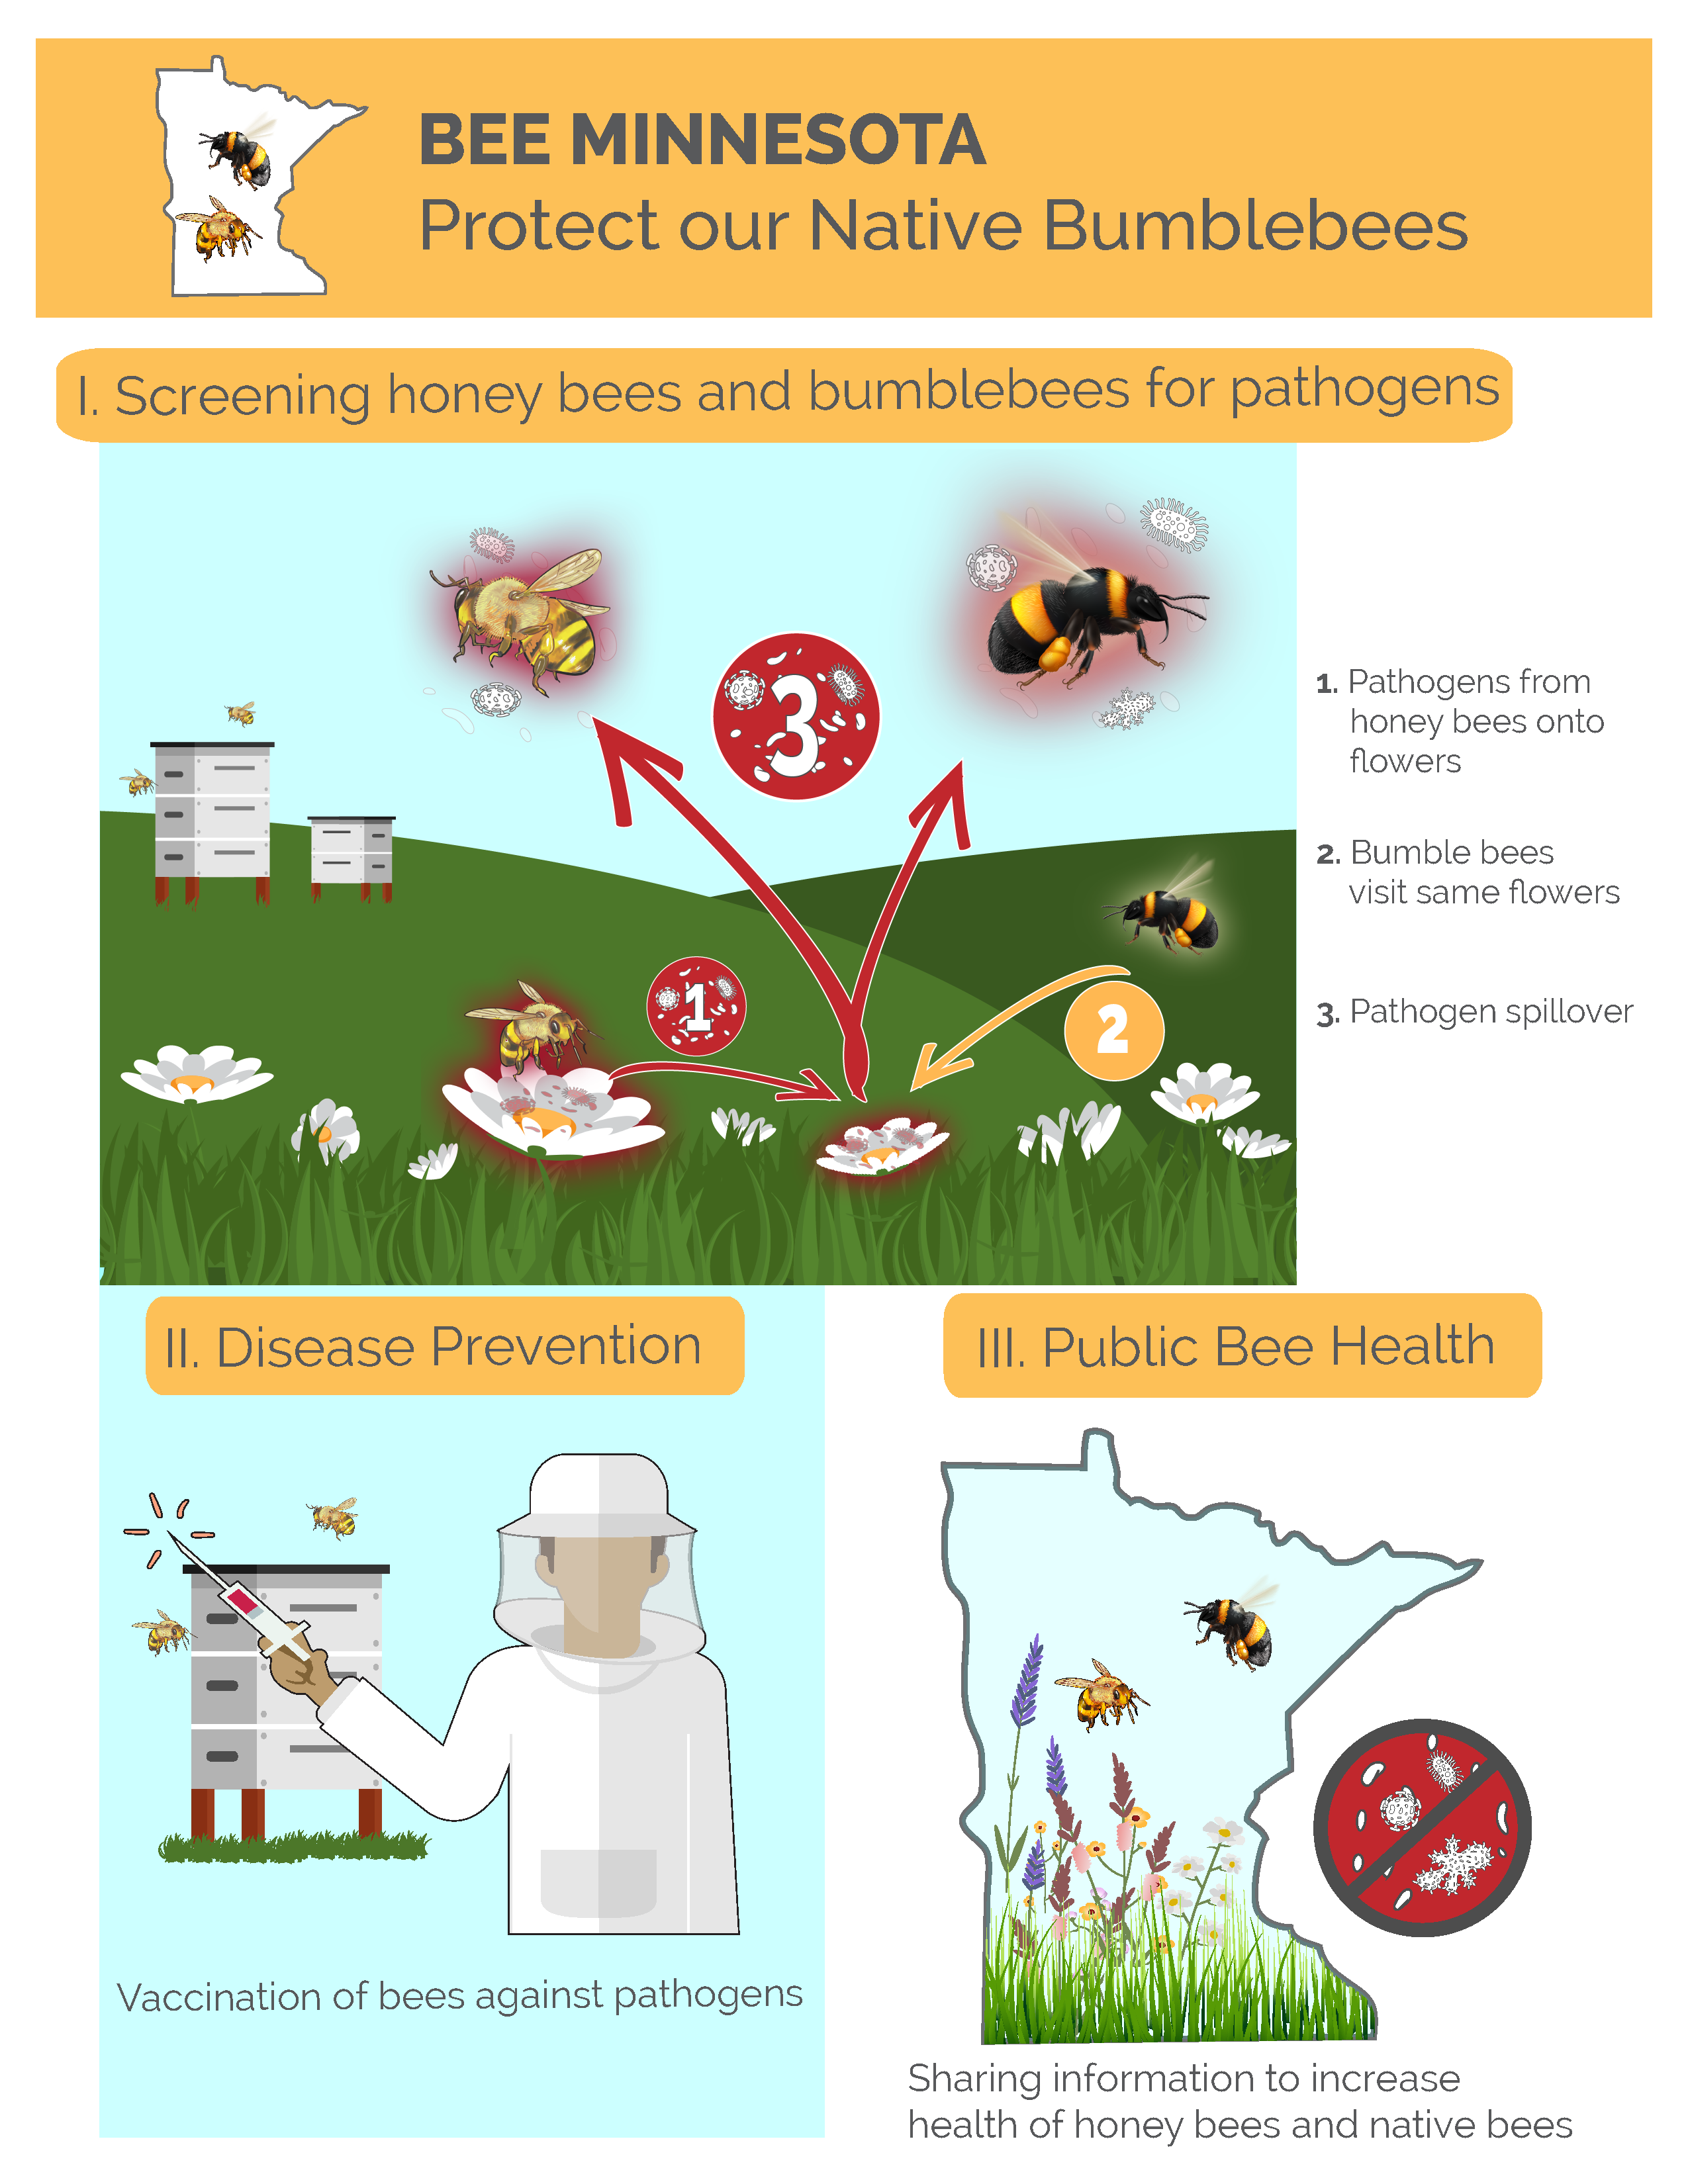 Bee Minnesota one page diagram showing vectors for bumblebee and honeybee cross contamination